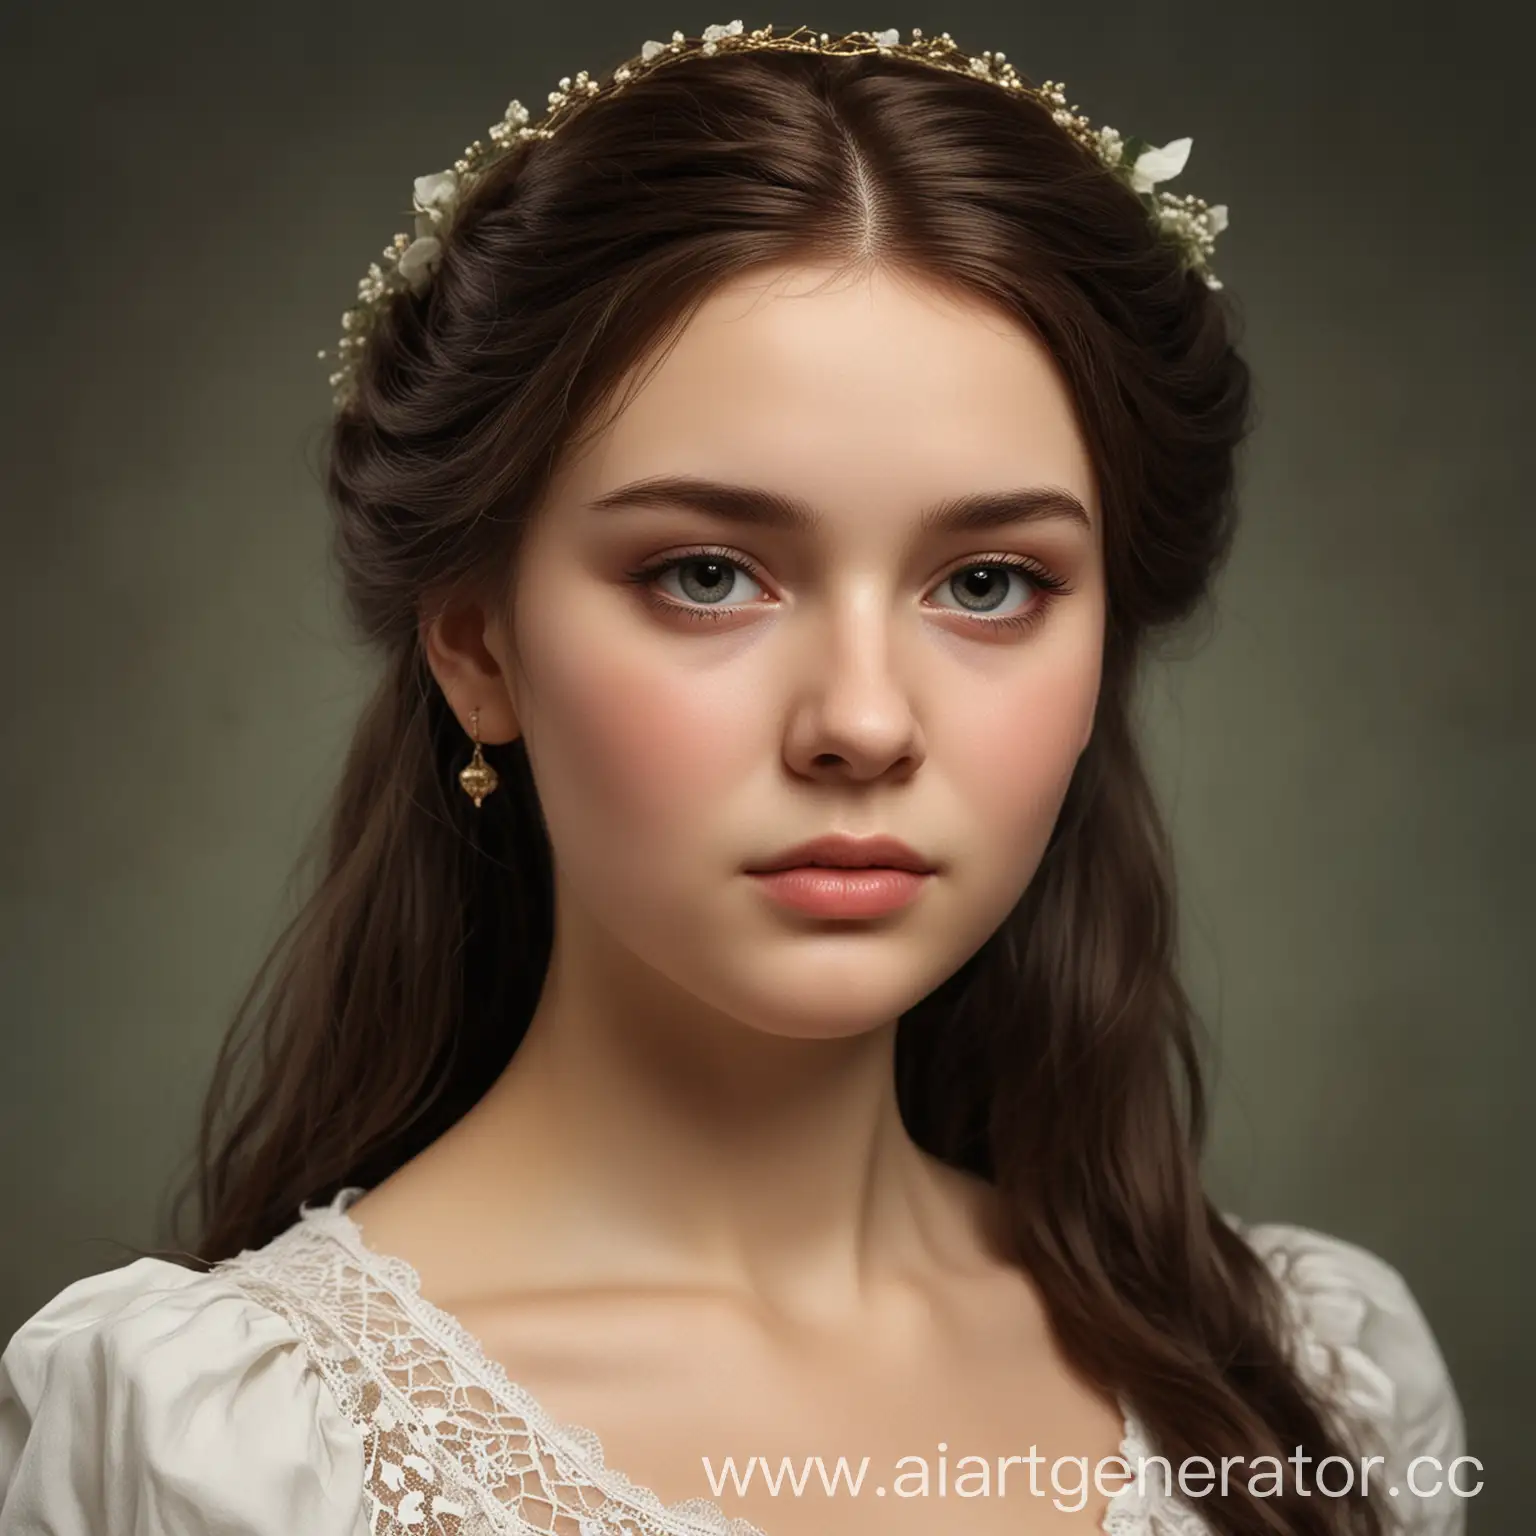 Realistic-Portrait-of-Eugenia-a-Girl-with-Striking-Appearance